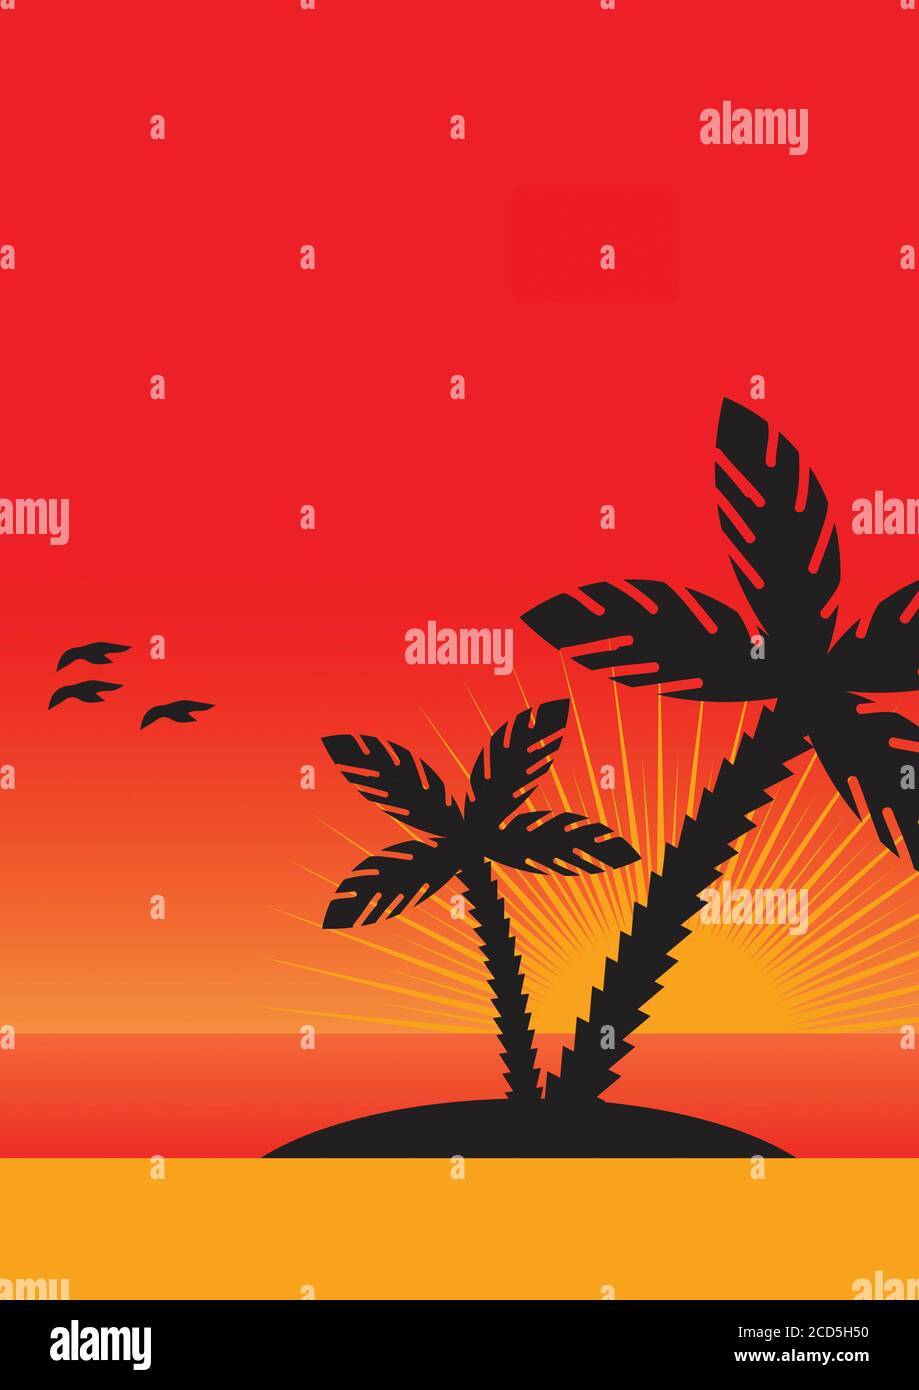 Sunset view over small tropical island with setting sun red sky and water and palm trees silhouette illustration. Stock Photo